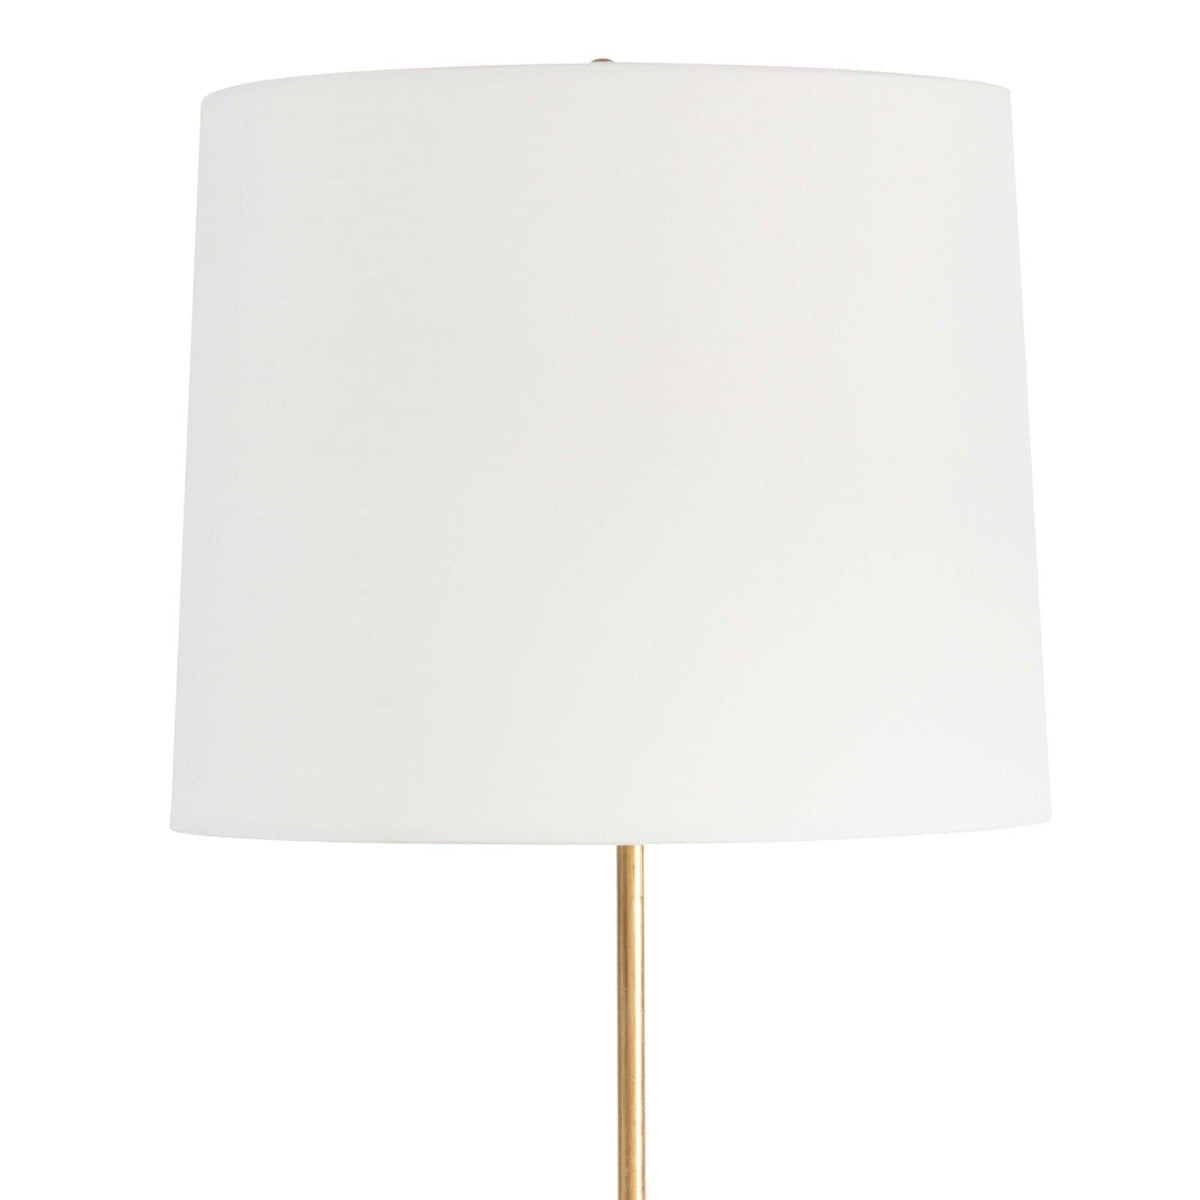 Parasol Table Lamp. Front view.